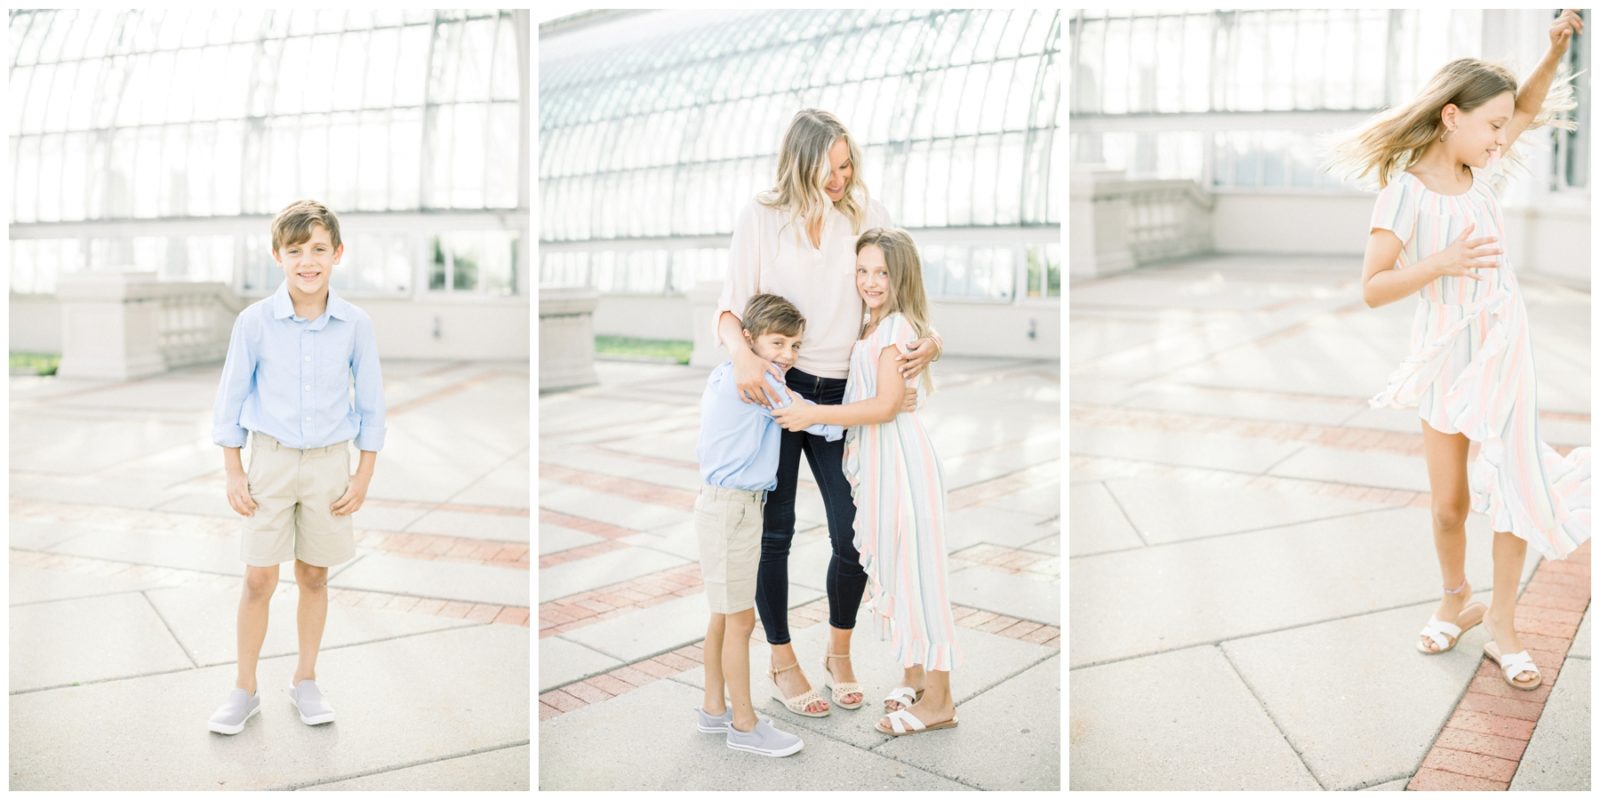 Light and Airy Family Photographer takes pictures of mother and 2 kids.